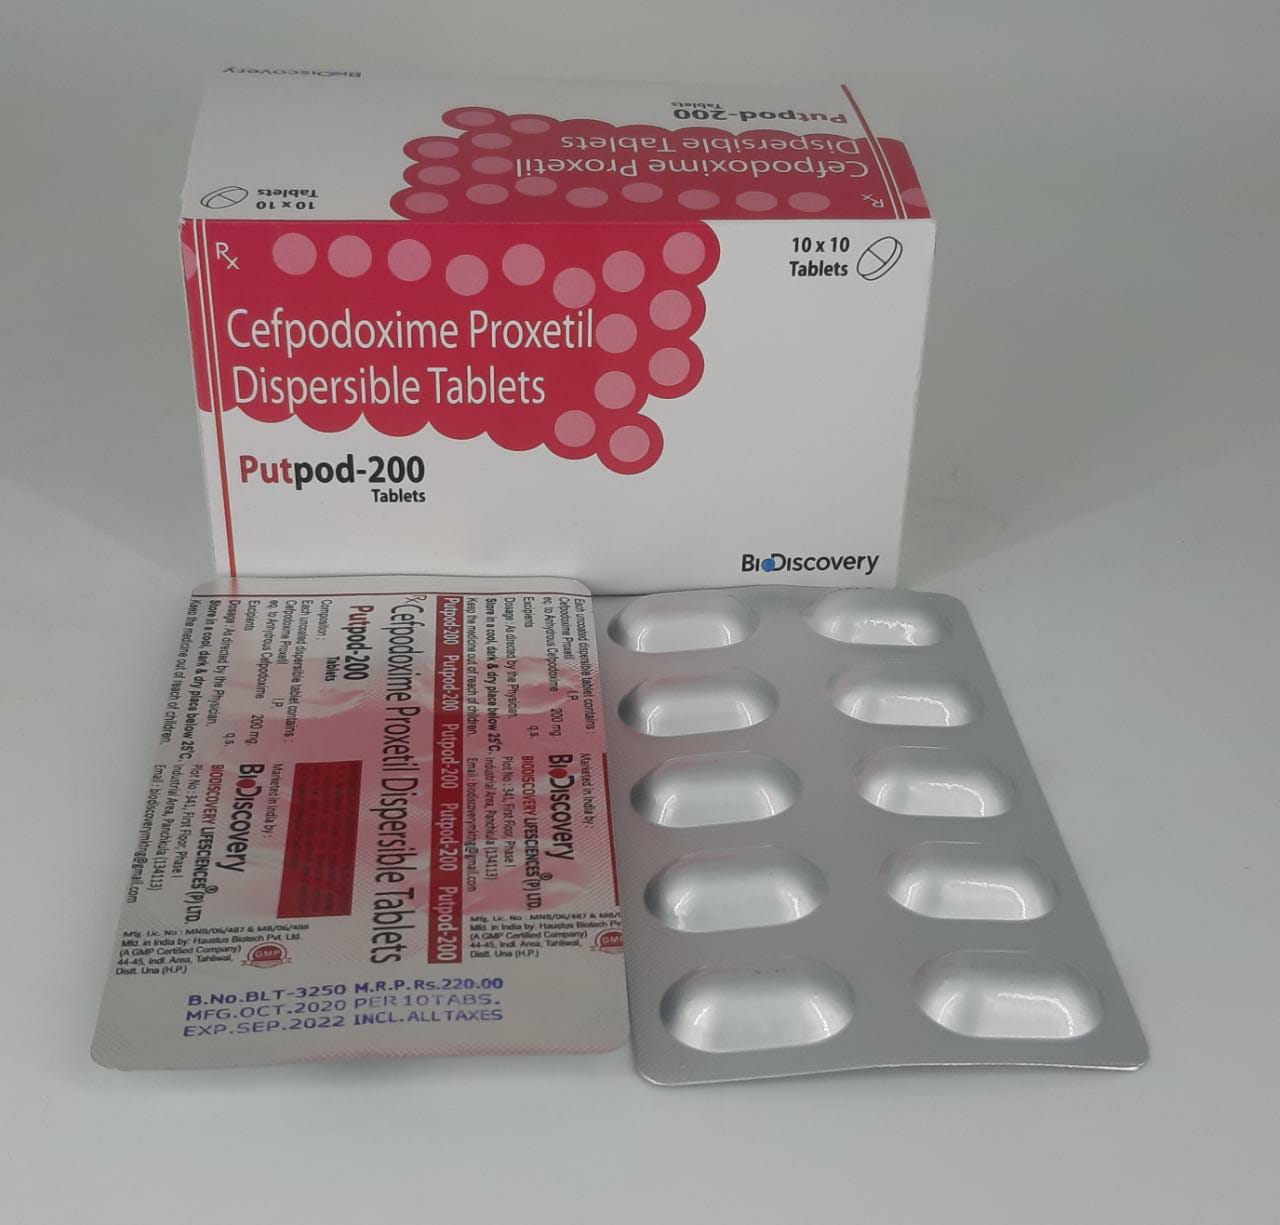 Product Name: Putpod 200, Compositions of Putpod 200 are Cefpodoxime Proxetil Dispersable Tablets - Biodiscovery Lifesciences Pvt Ltd